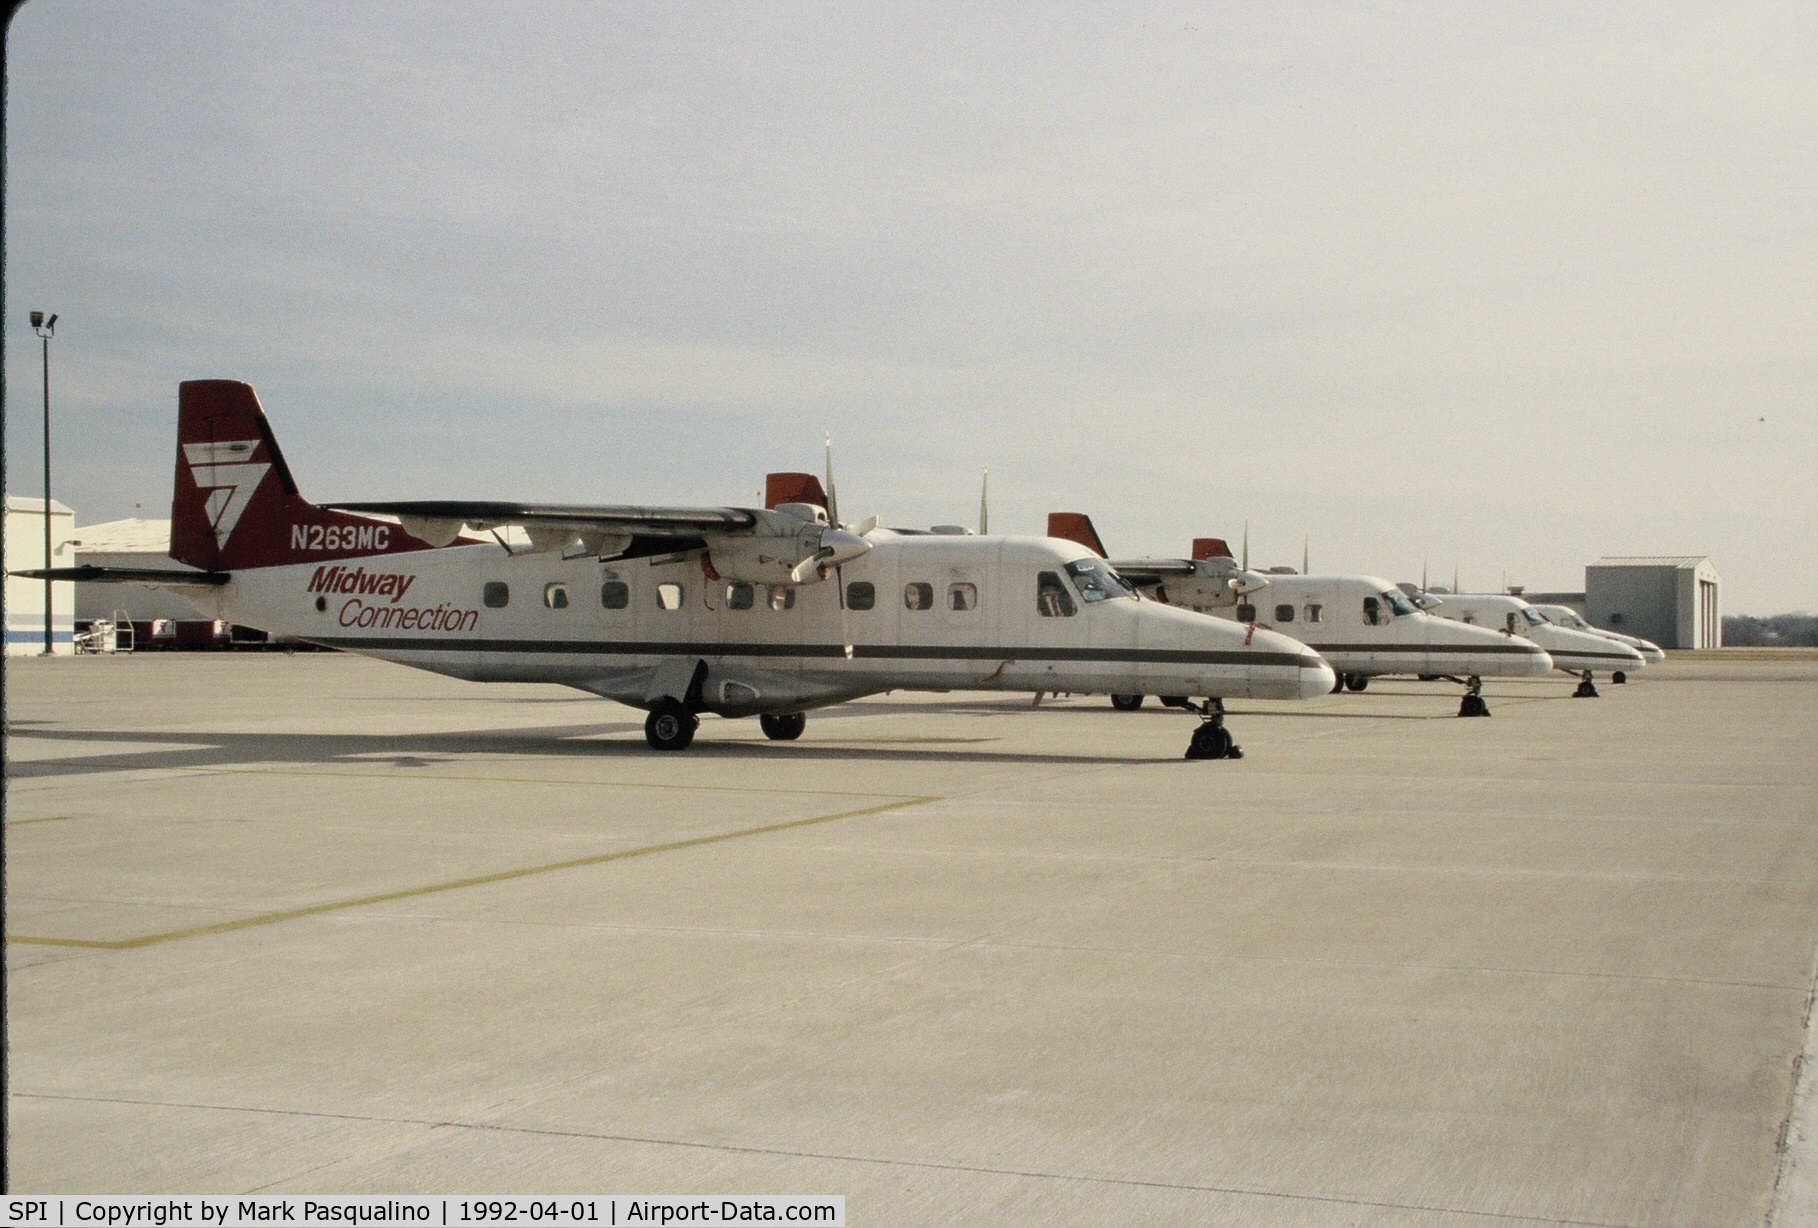 Abraham Lincoln Capital Airport (SPI) - Midwest Connection fleet